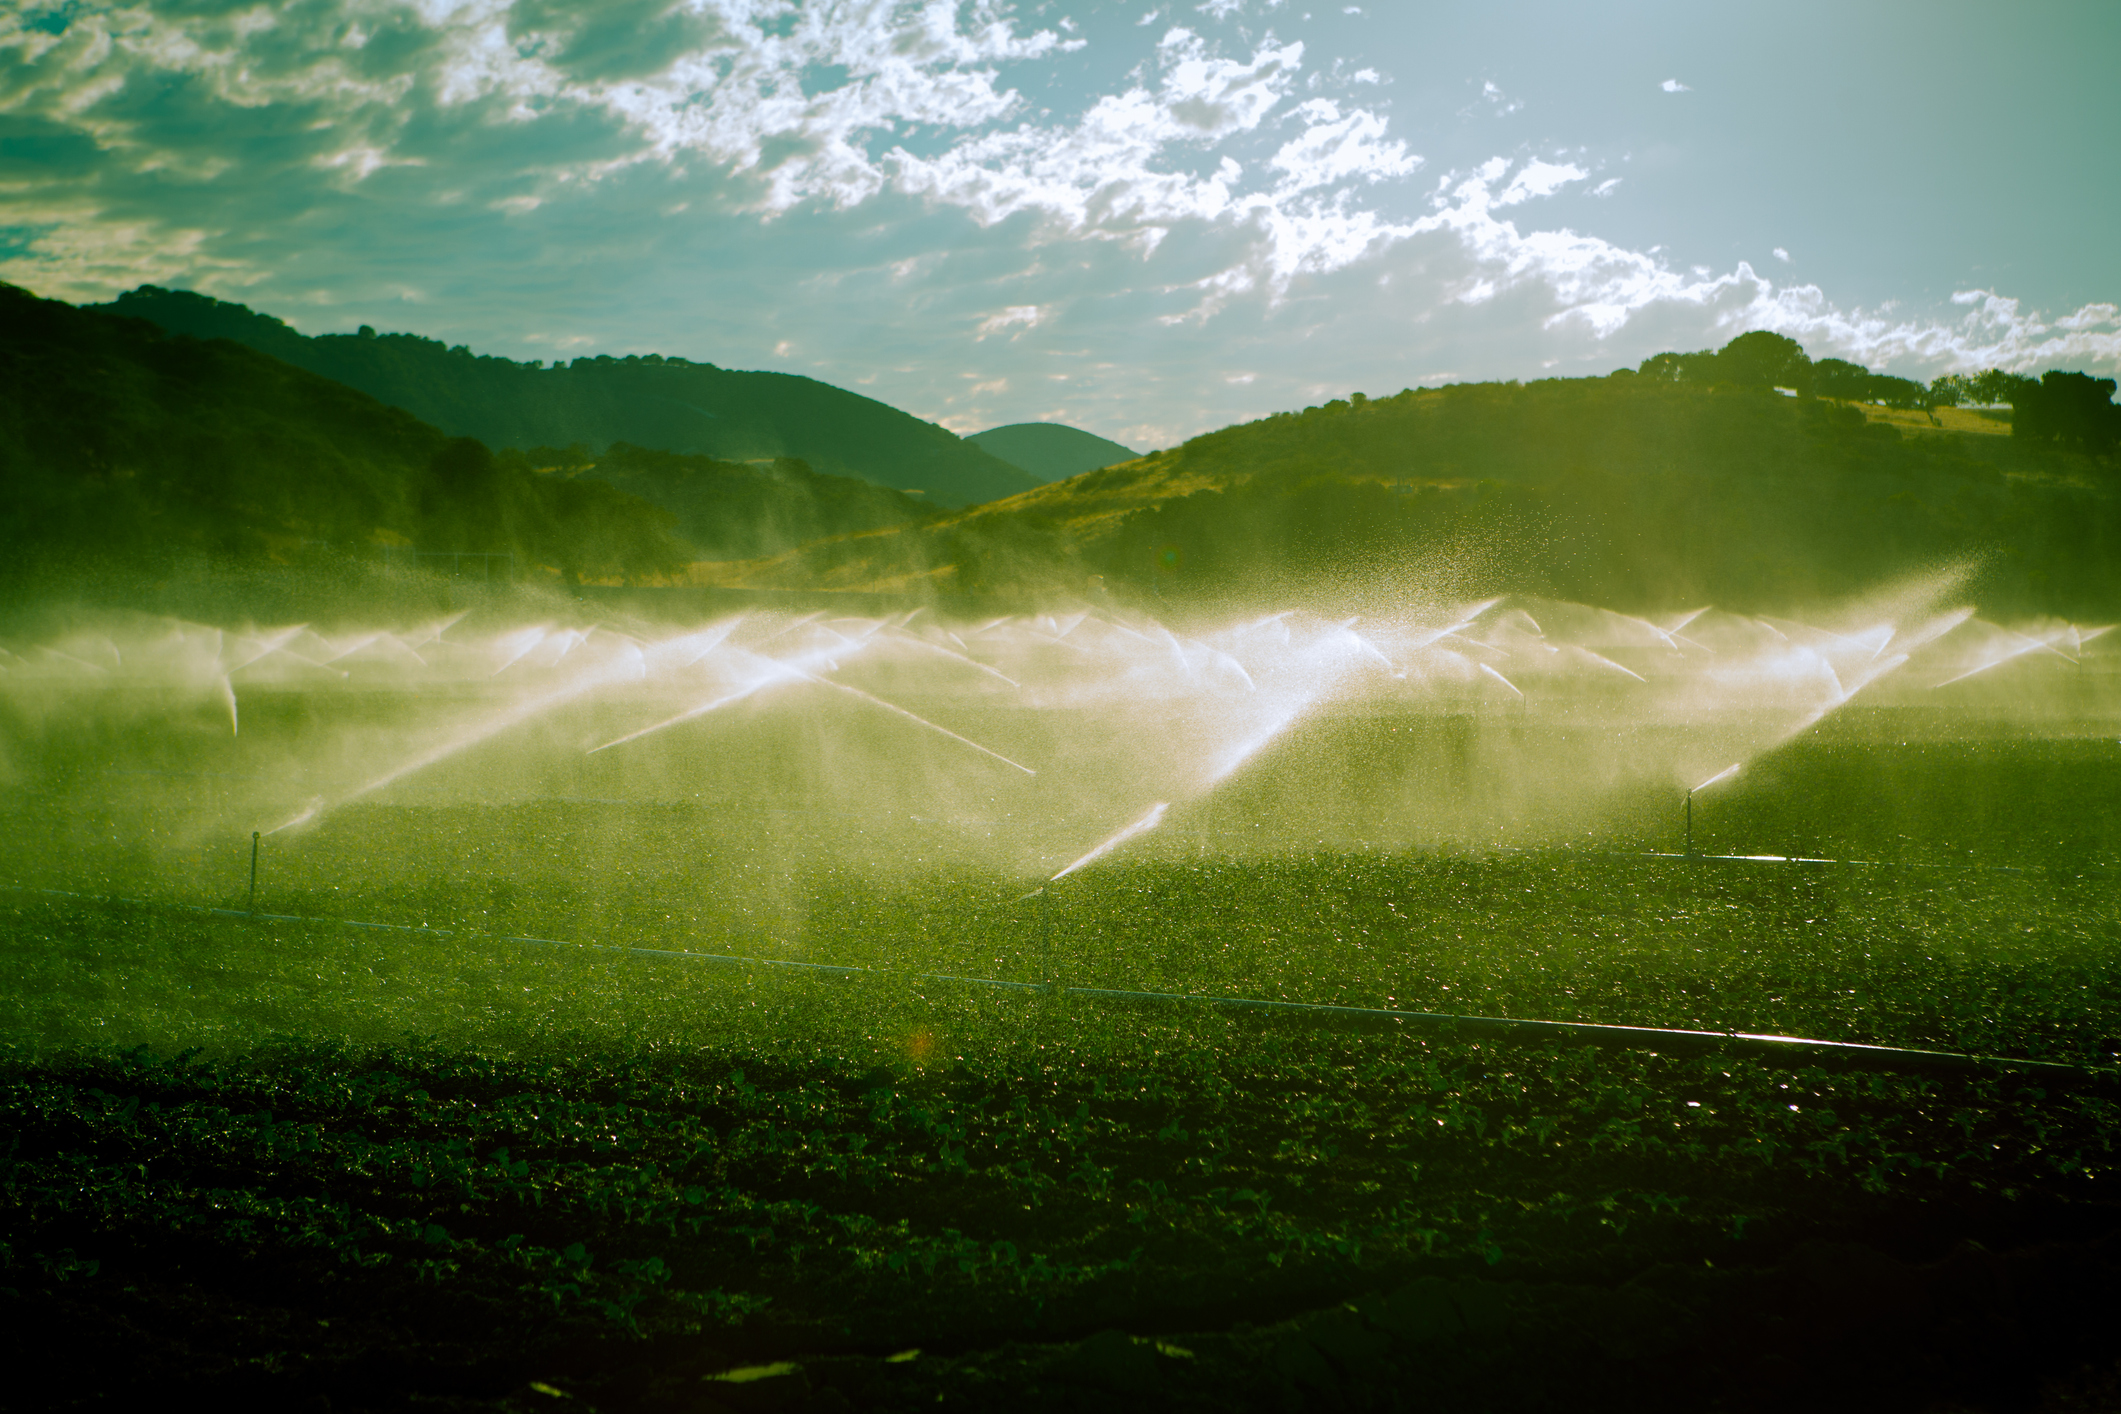 Late Afternoon Toned Photo Of California Farm With Irrigation